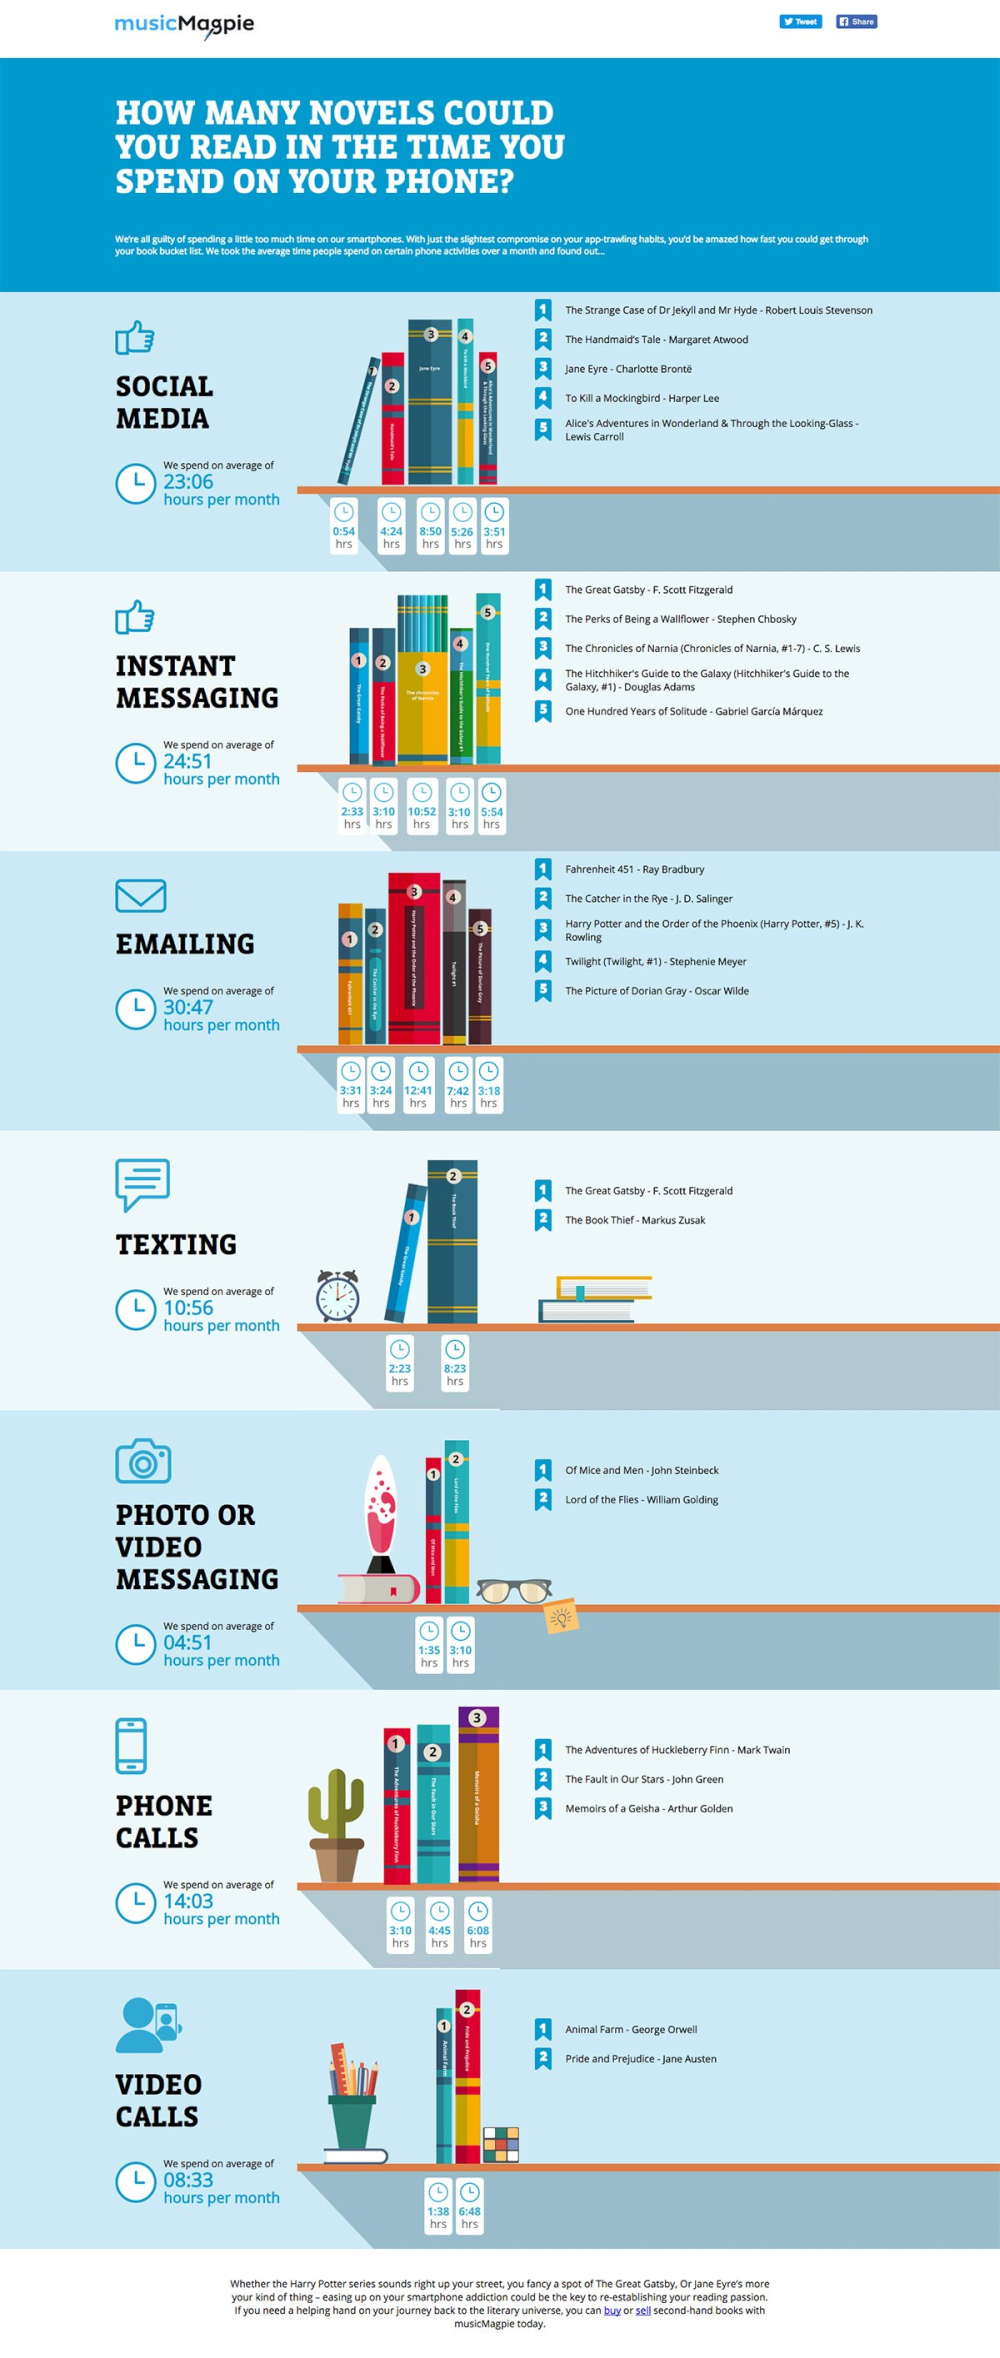 Find More Time for Reading Infographic